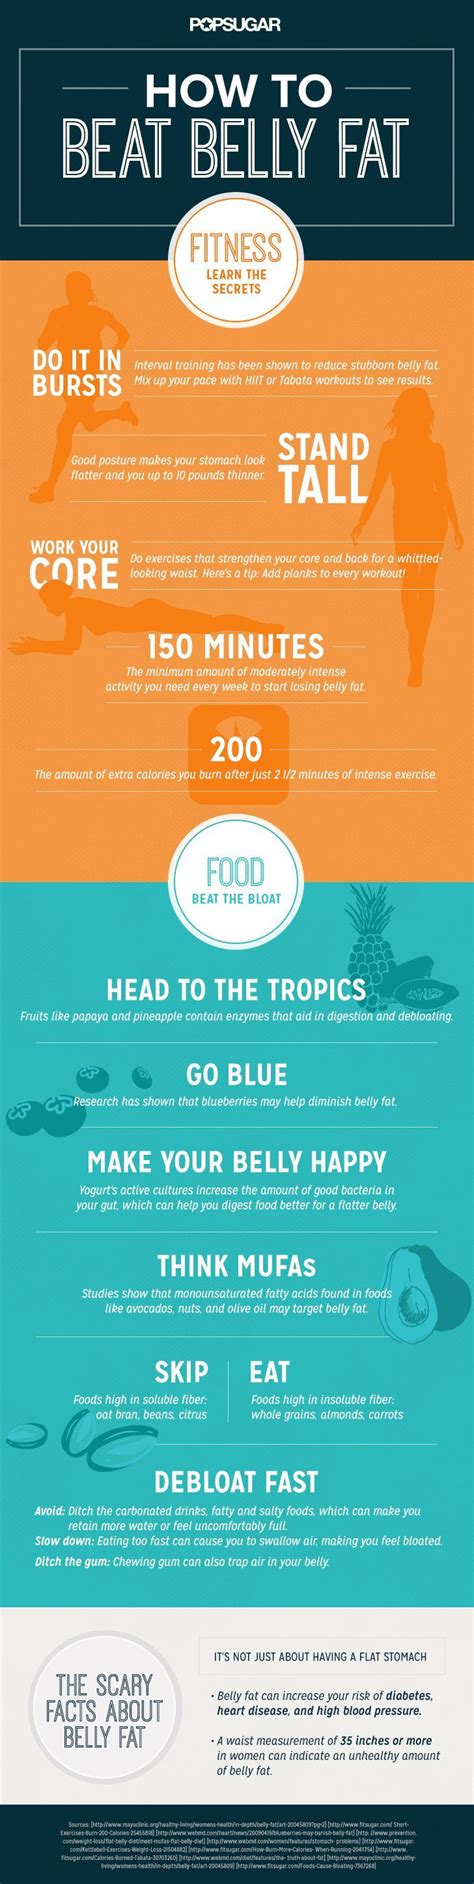 How To Beat Belly Fat Infographic Healthy Tips, Healthy Body, How To Stay Healthy, Healthy ...